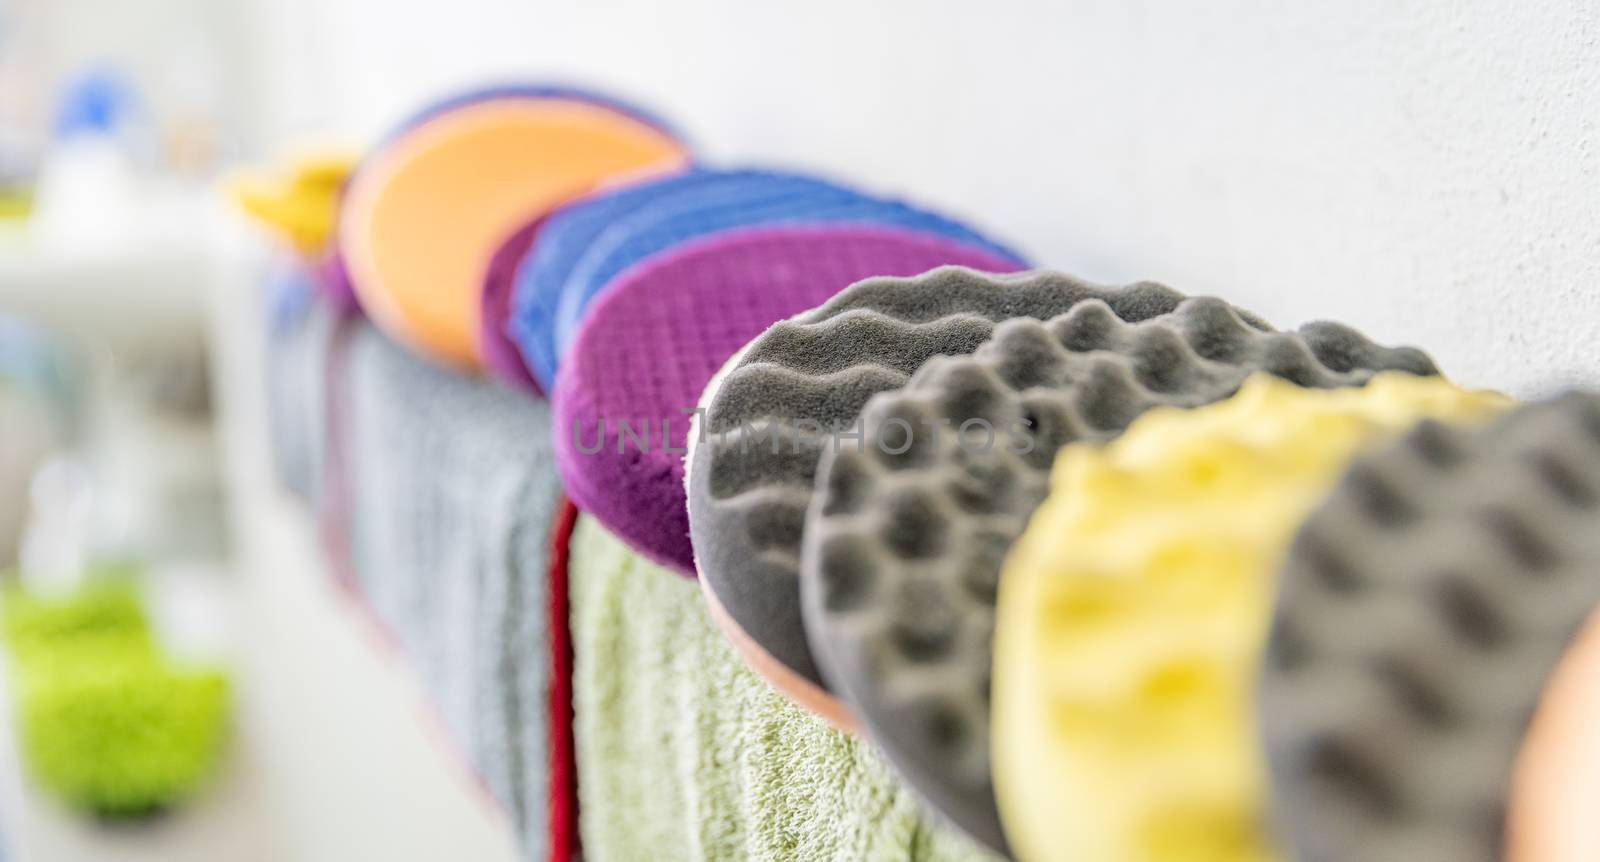 colored sponges for washing and polishing the interior and exterior of cars by Edophoto